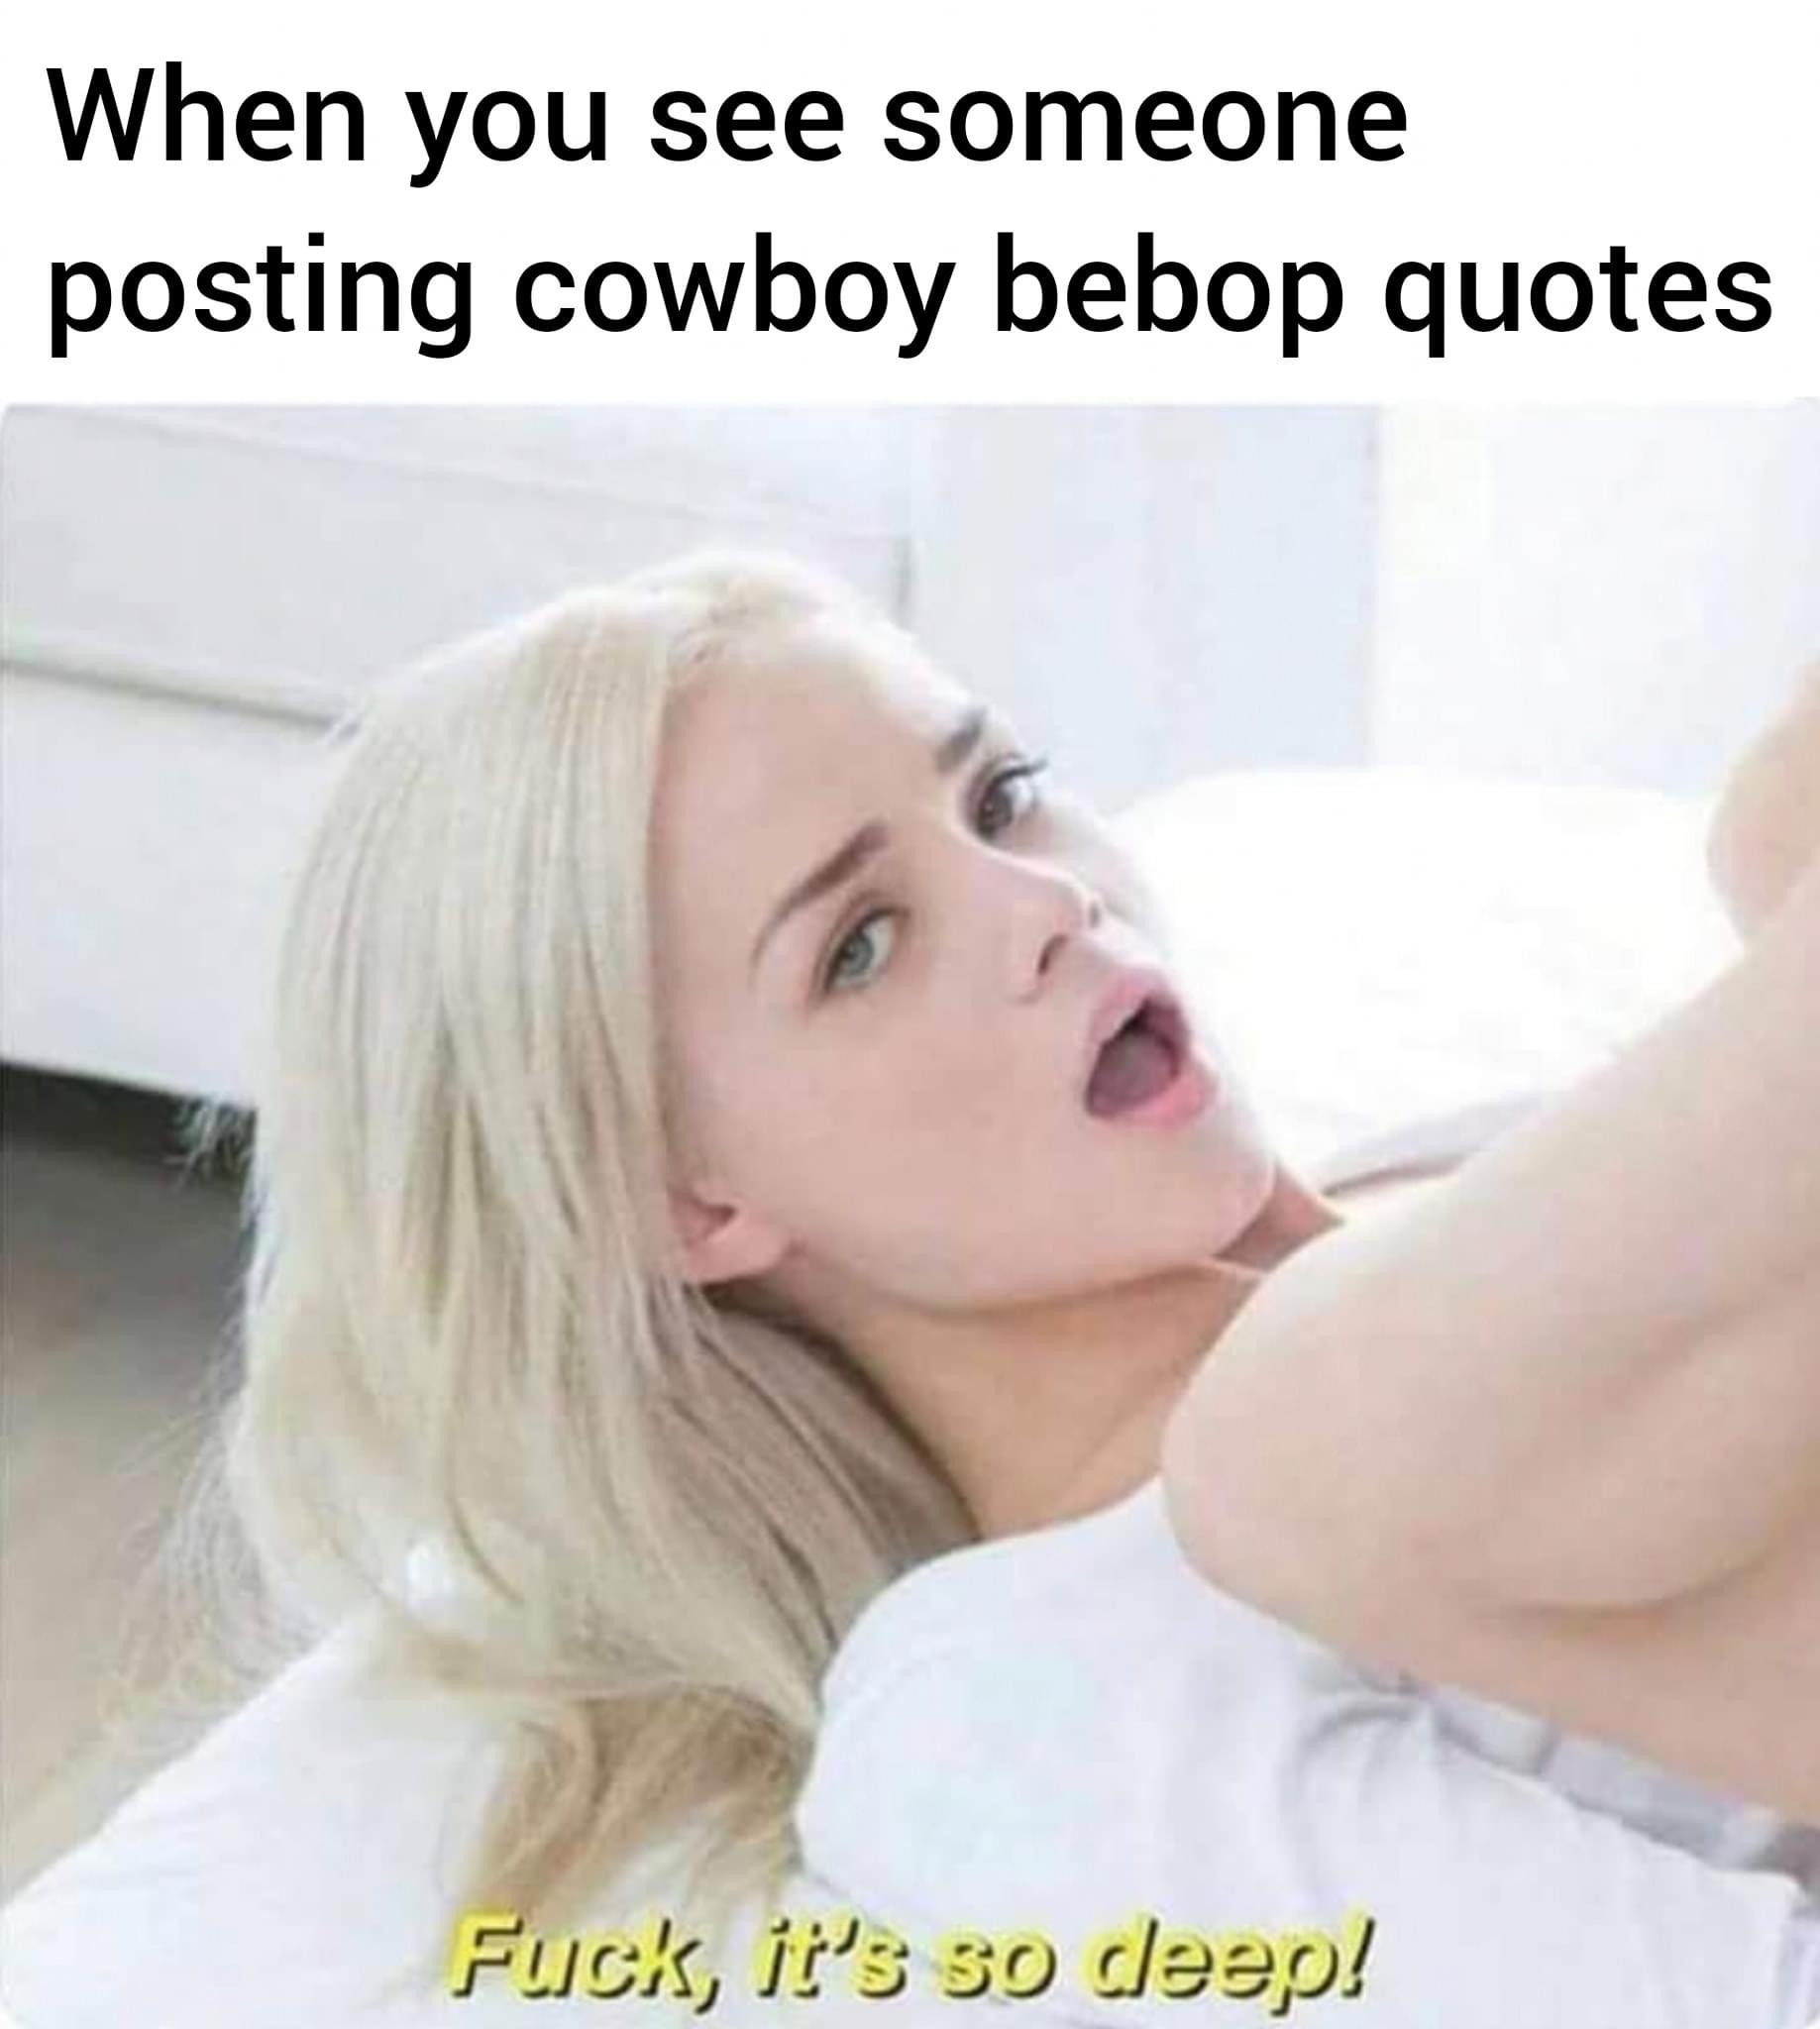 best porn memes - When you see someone posting cowboy bebop quotes Fuck, it's so deep!